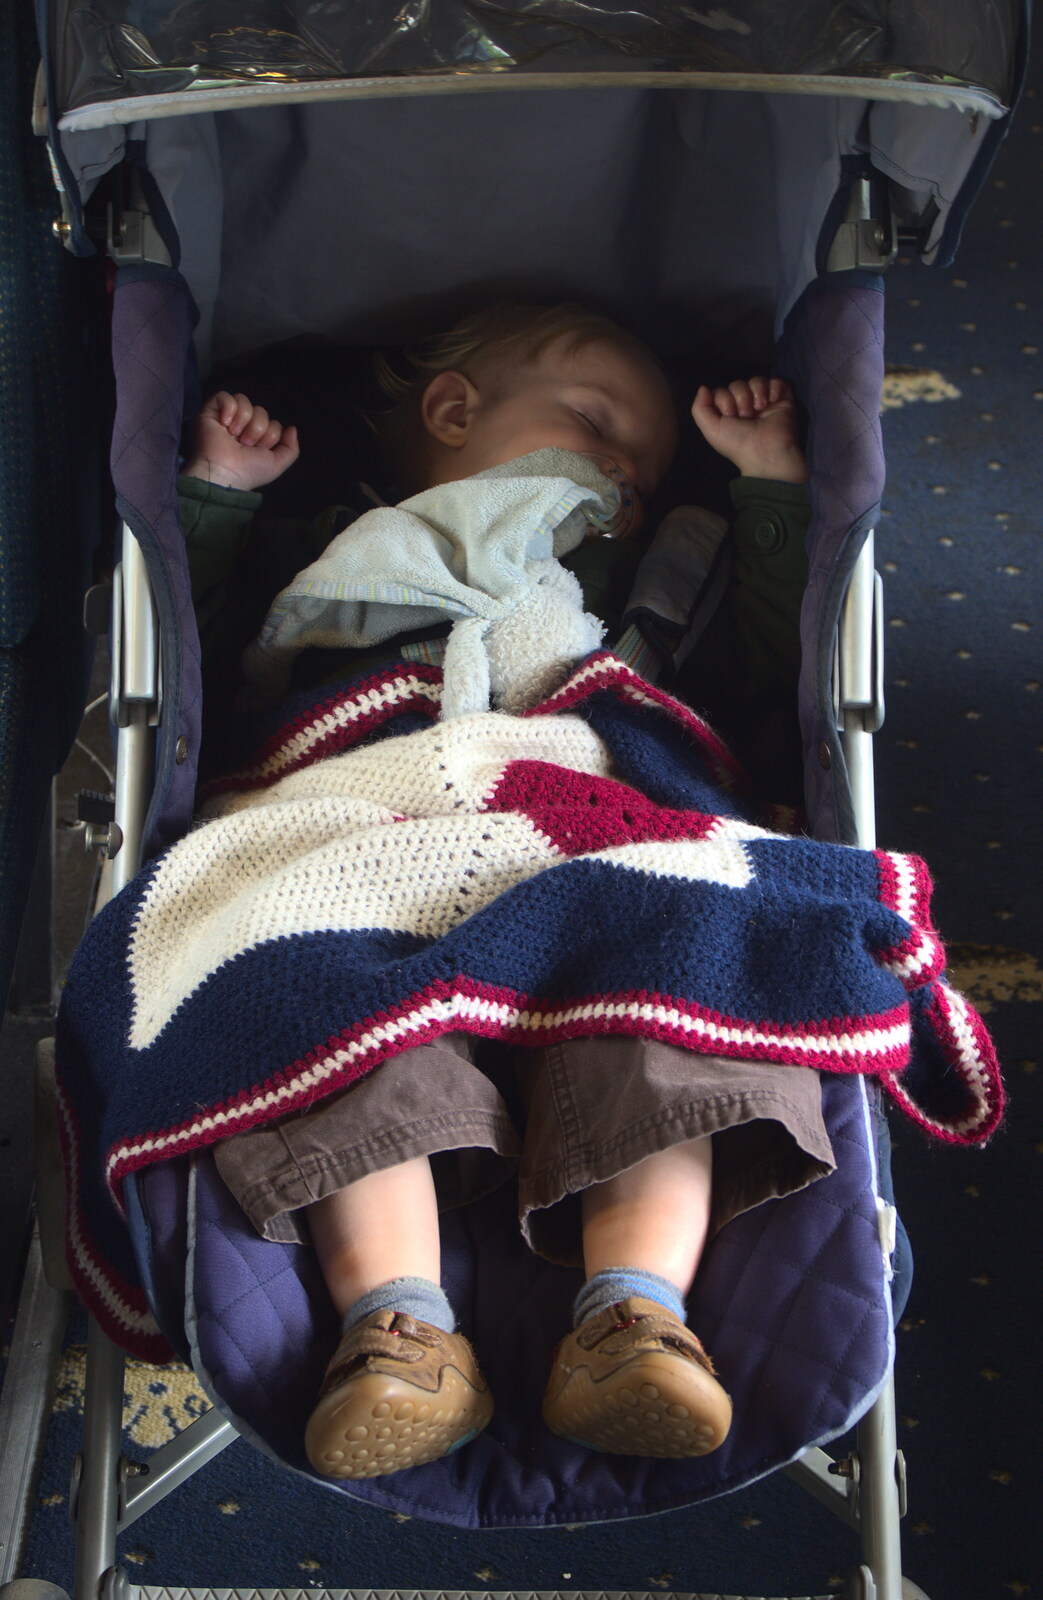 Harry - Baby Gabey - takes a nap from A Trip on the Norfolk Broads, Wroxham, Norfolk - 25th May 2013